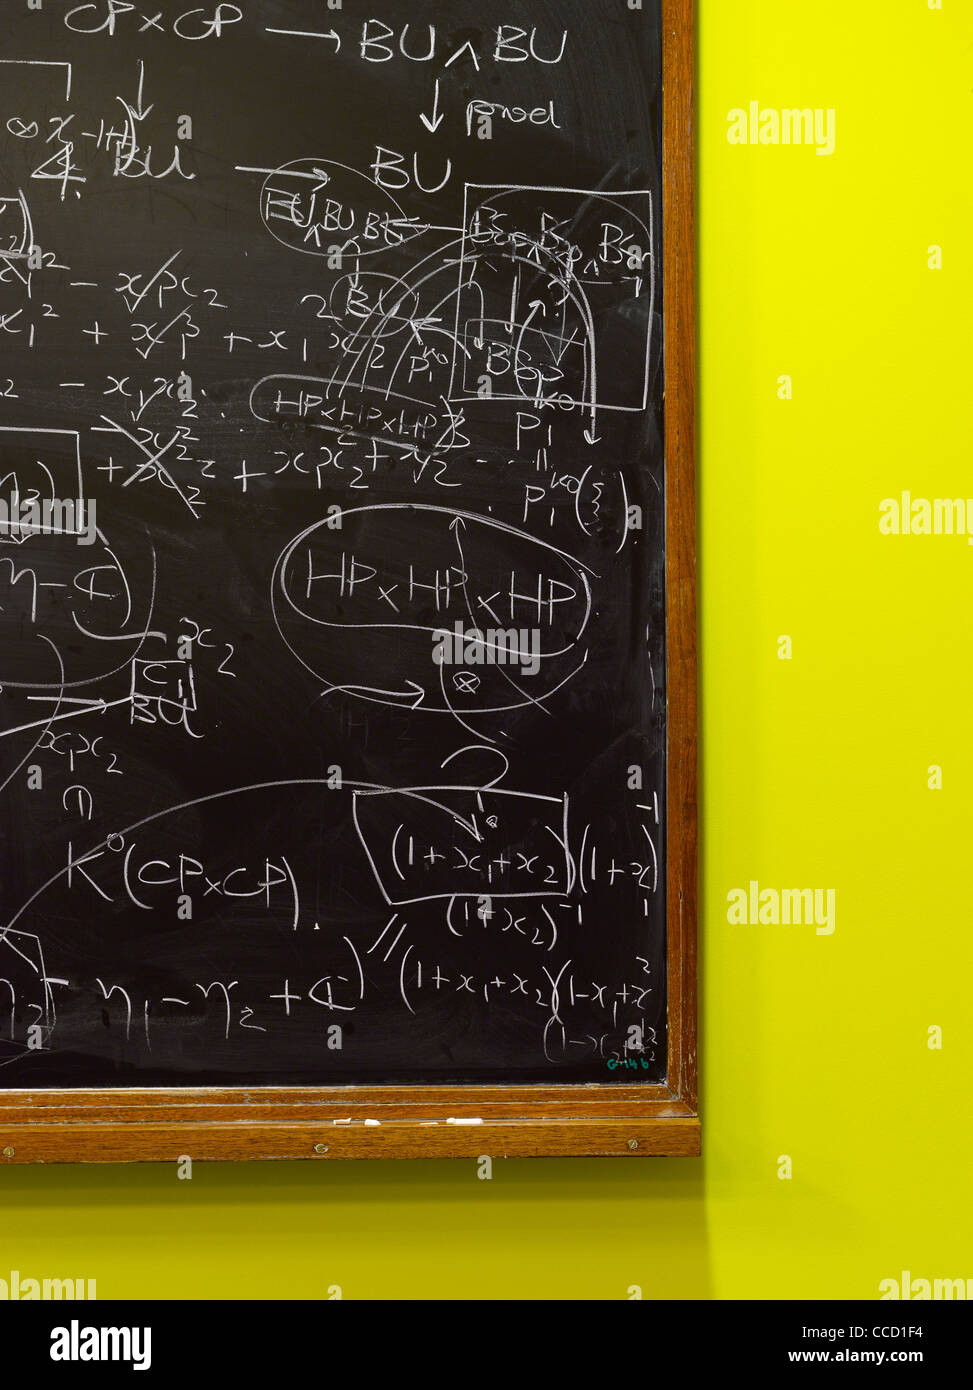 ALAN TURING BUILDING MANCHESTER UNIVERSITY SHEPPARD ROBSON INTERIOR VIEW BLACKBOARD WITH FORMULAS Stock Photo